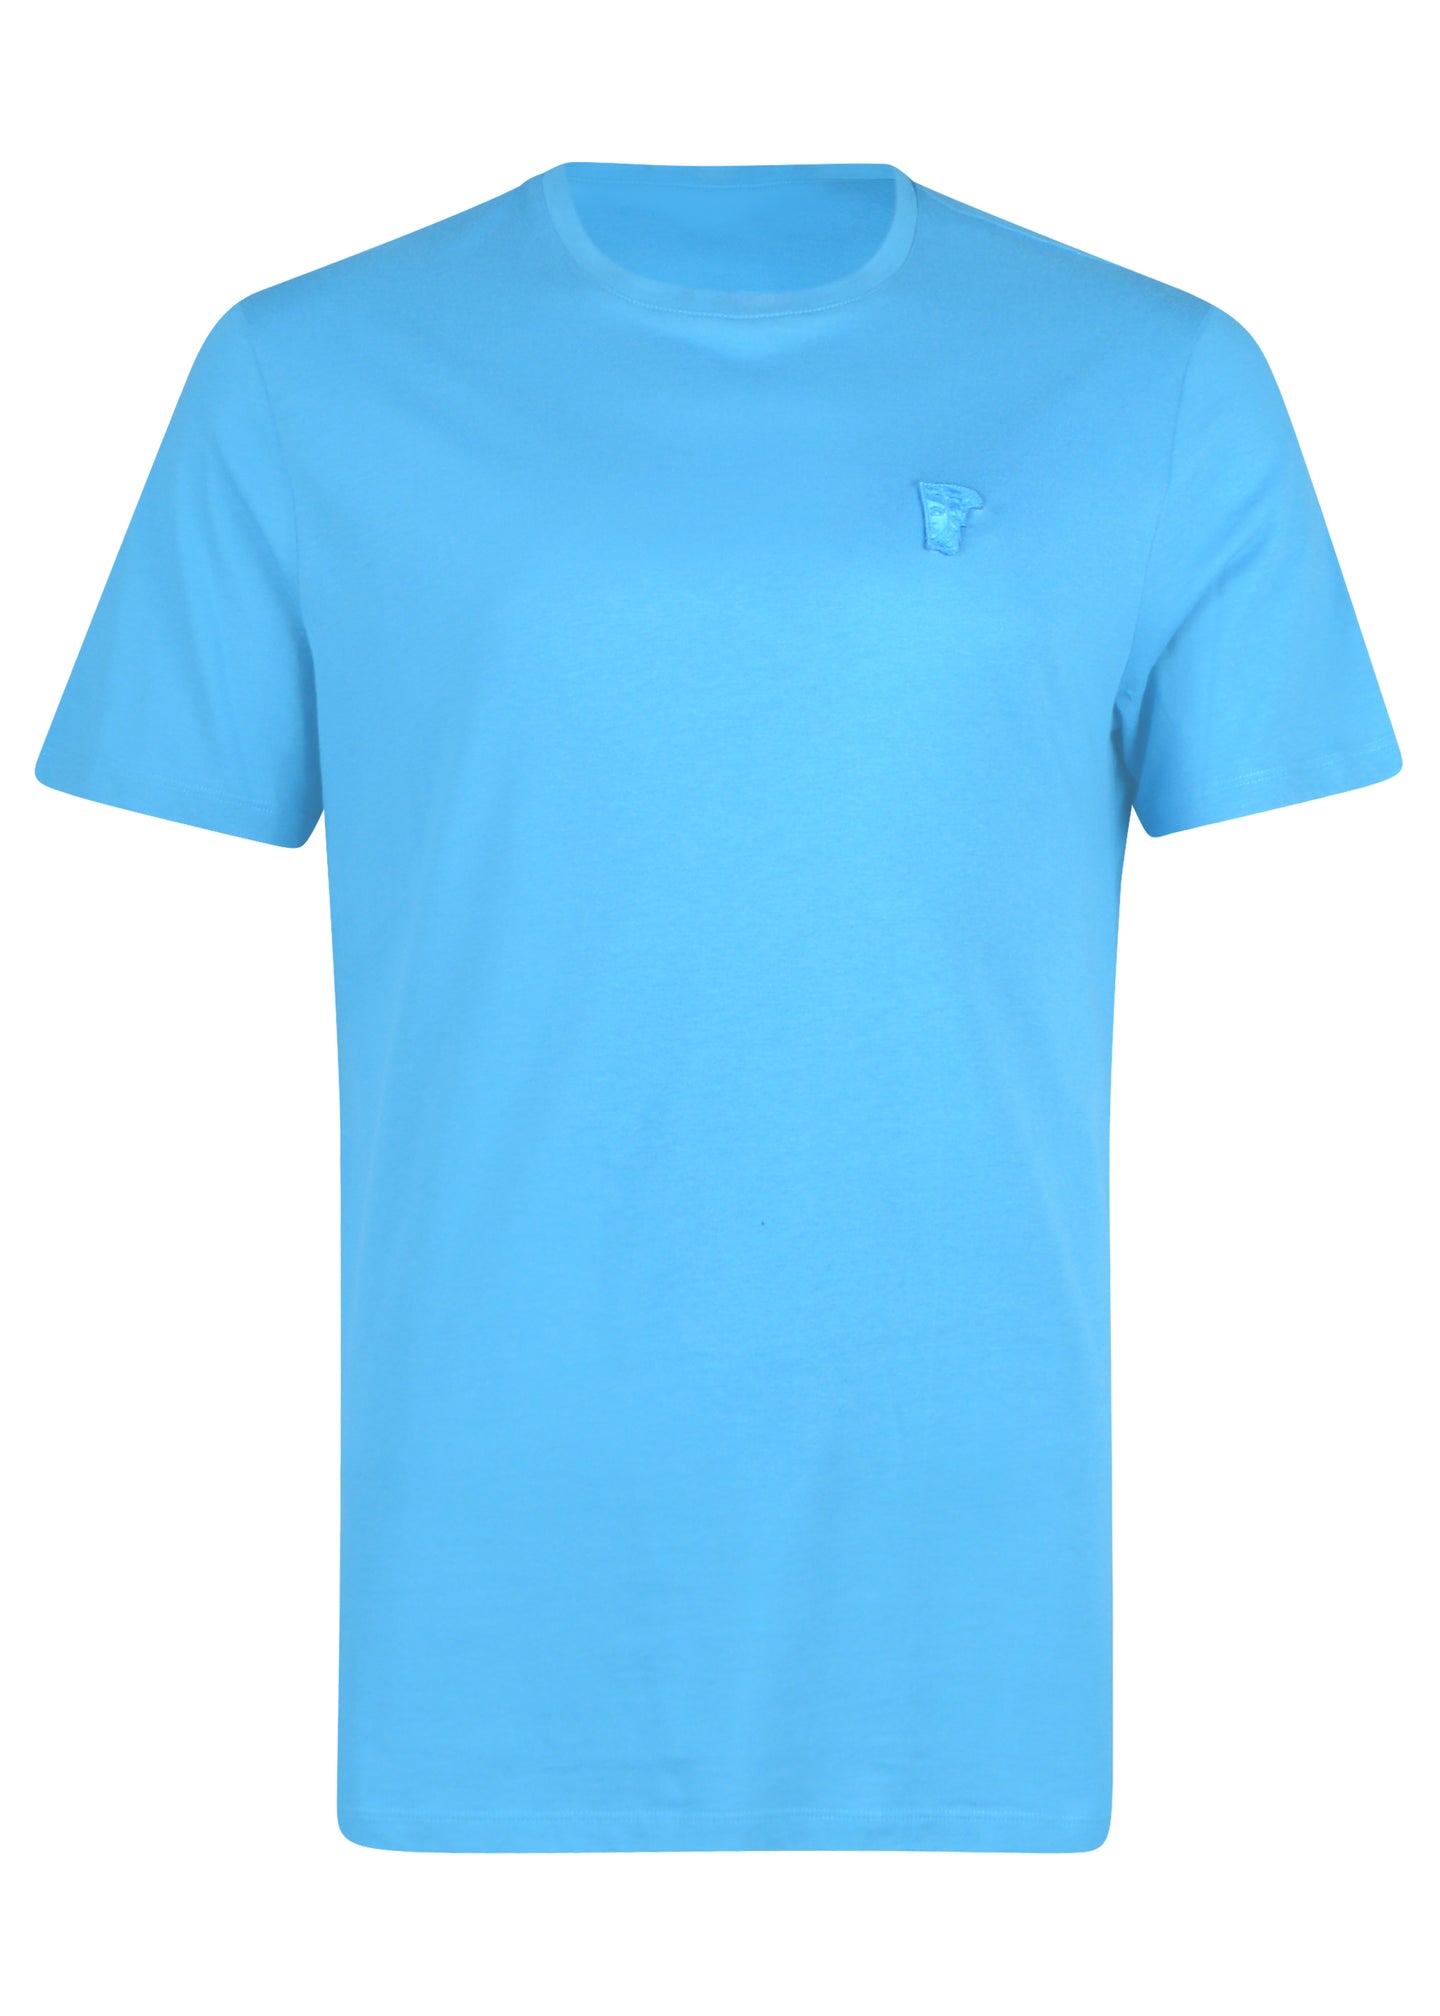 Versace Collection - Short Sleeve Iconic Half Medusa T-Shirt - 095010 - V800683 - Turquoise